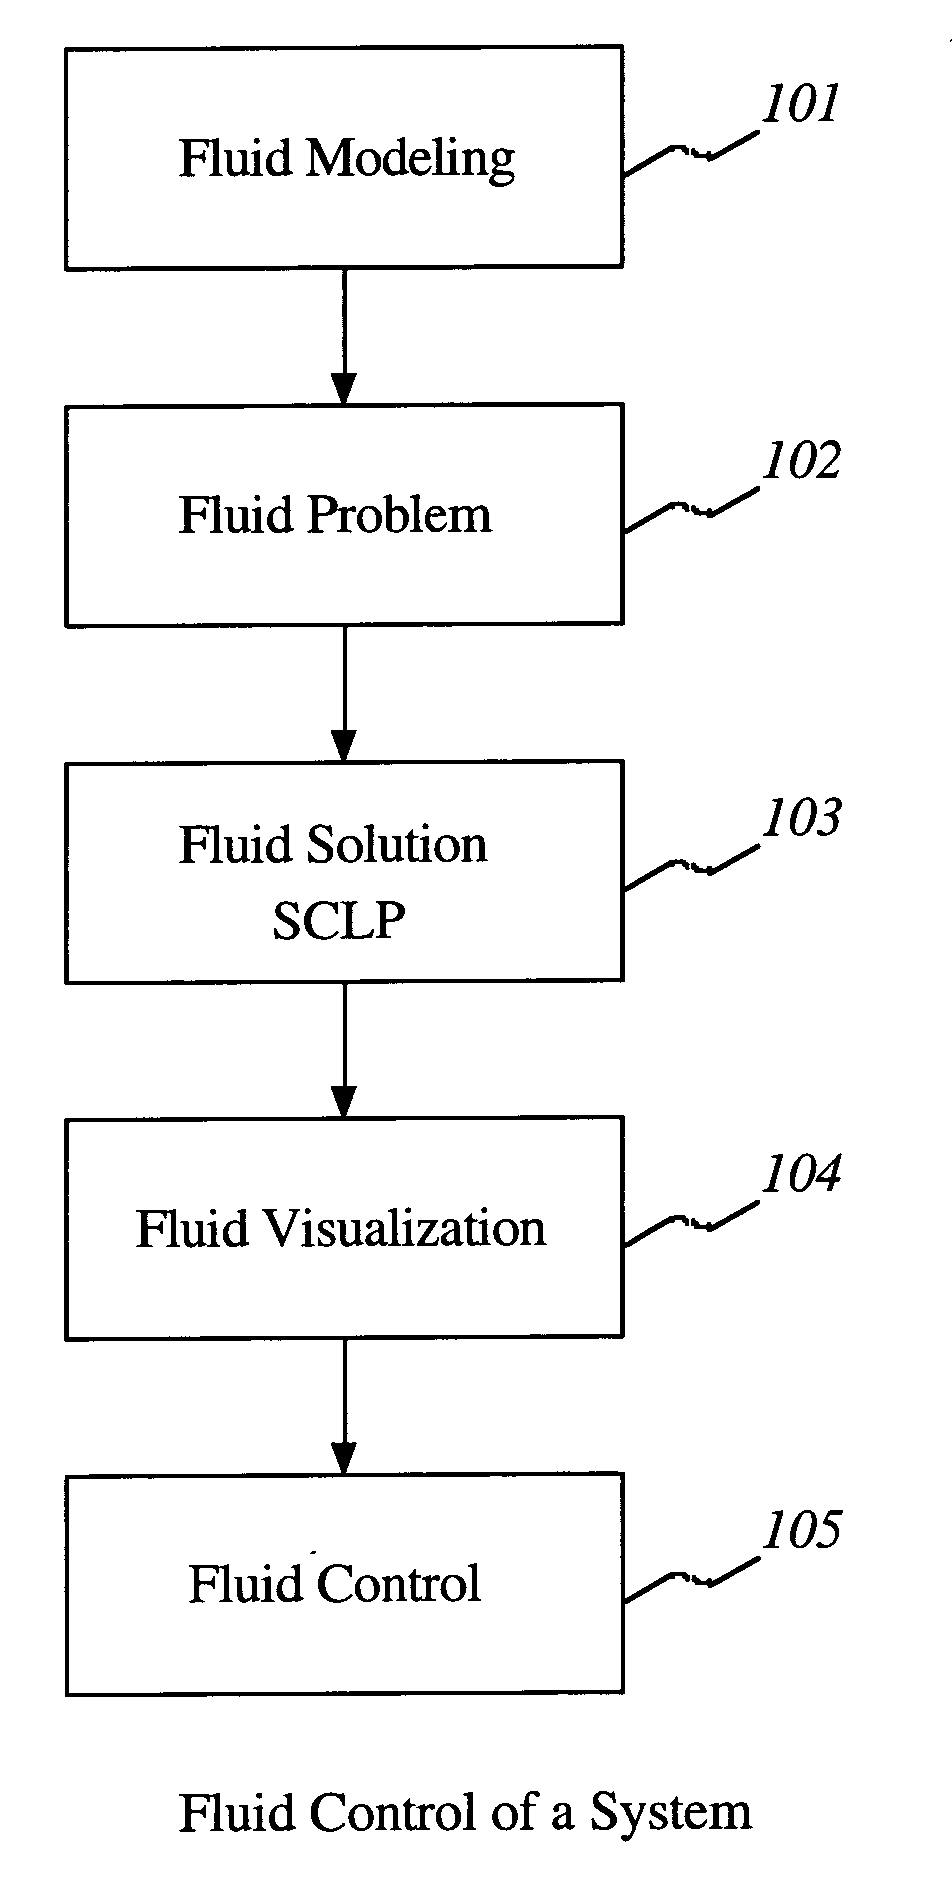 Control of items in a complex system by using fluid models and solving continuous linear programs